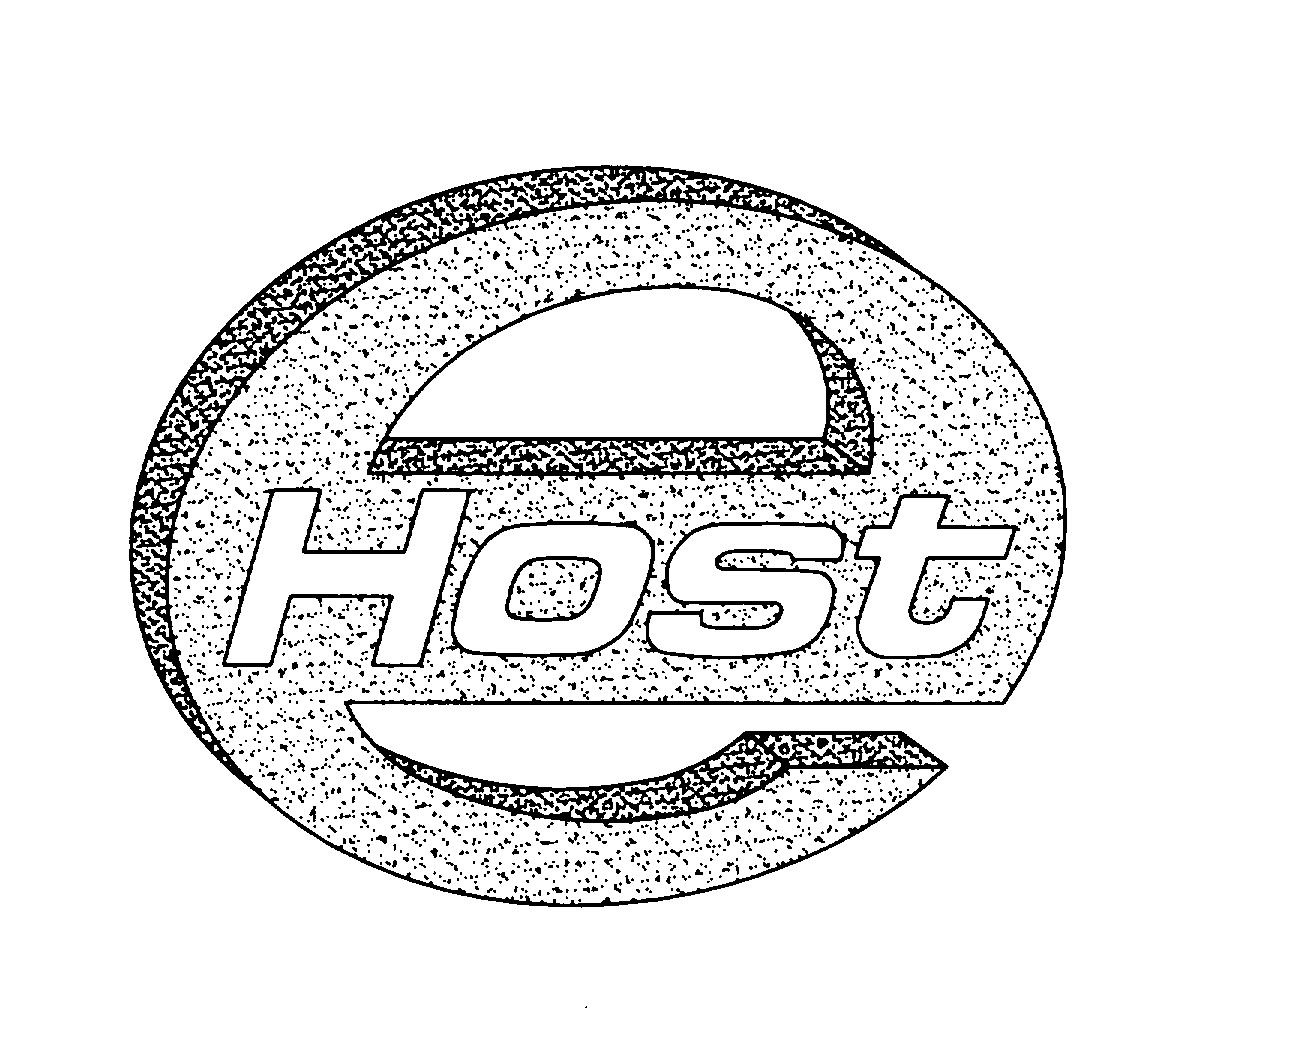 EHOST